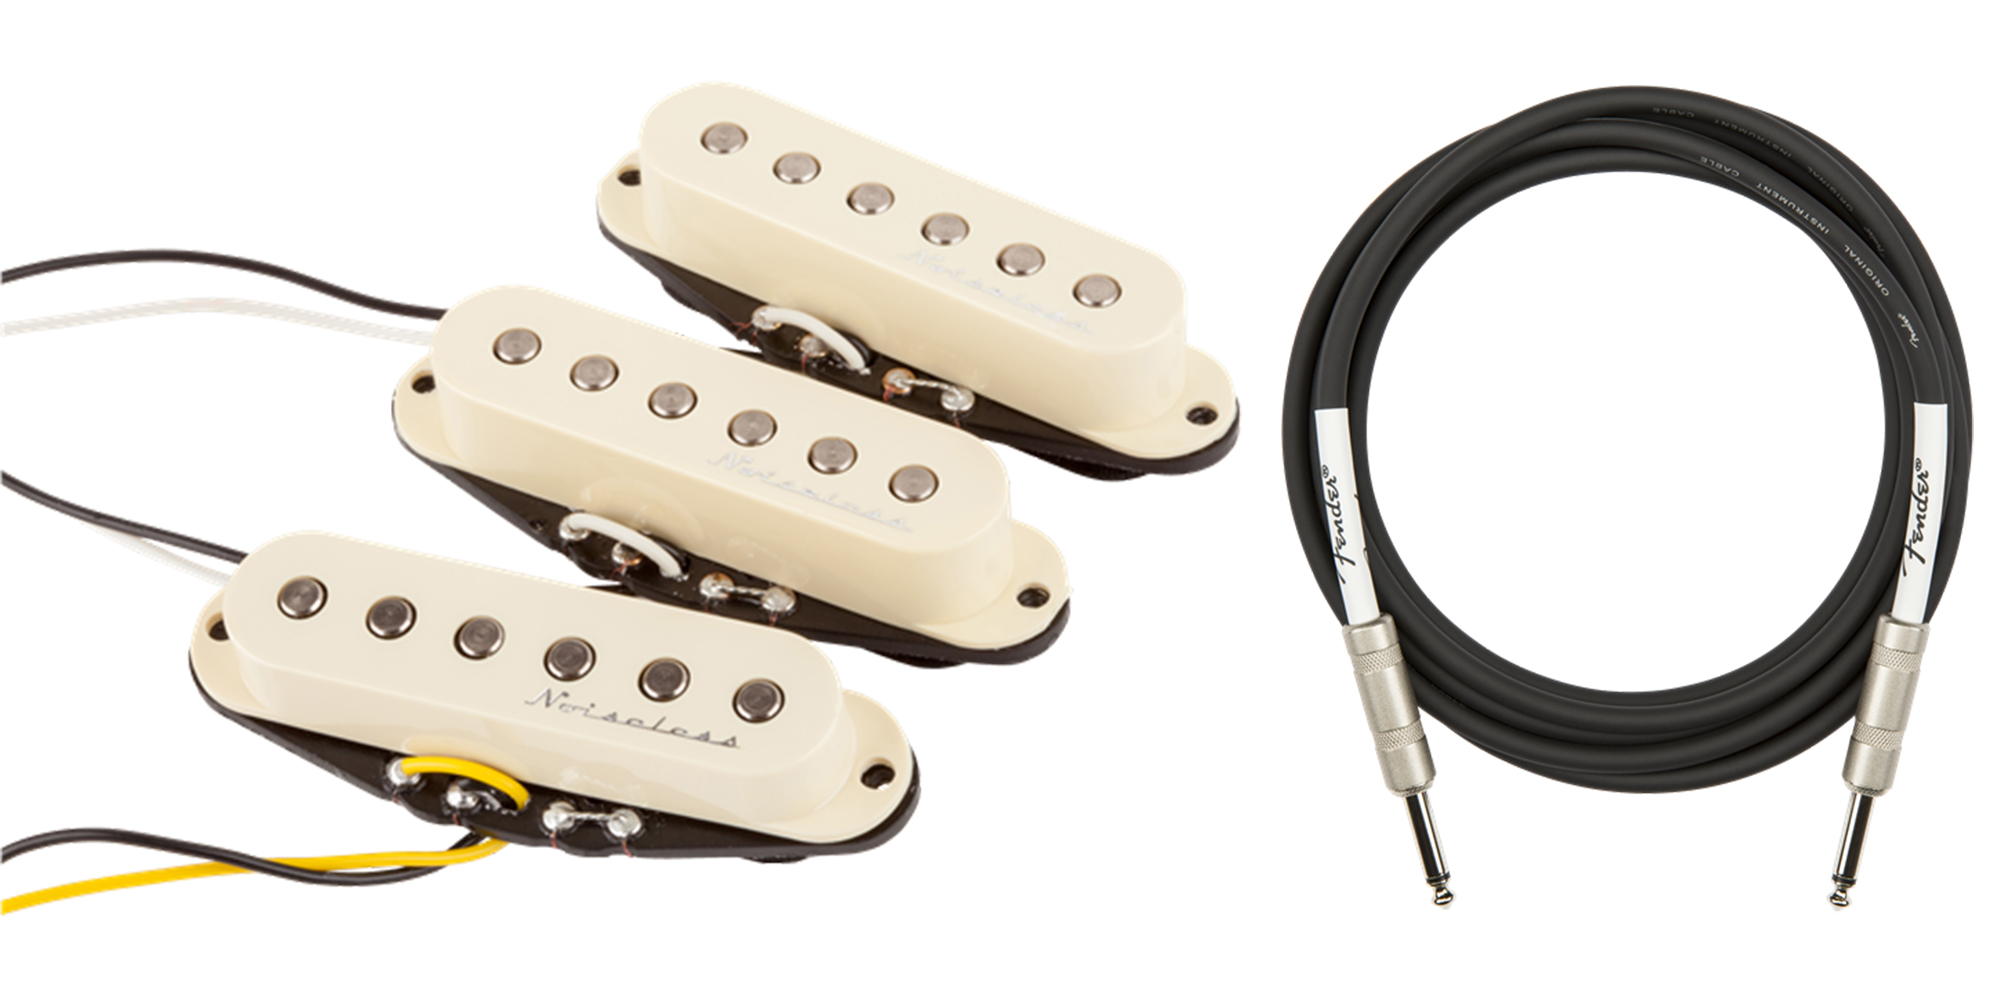 Fender Hot Noiseless Stratocaster Pickups - Aged White w/ Instrument Cable